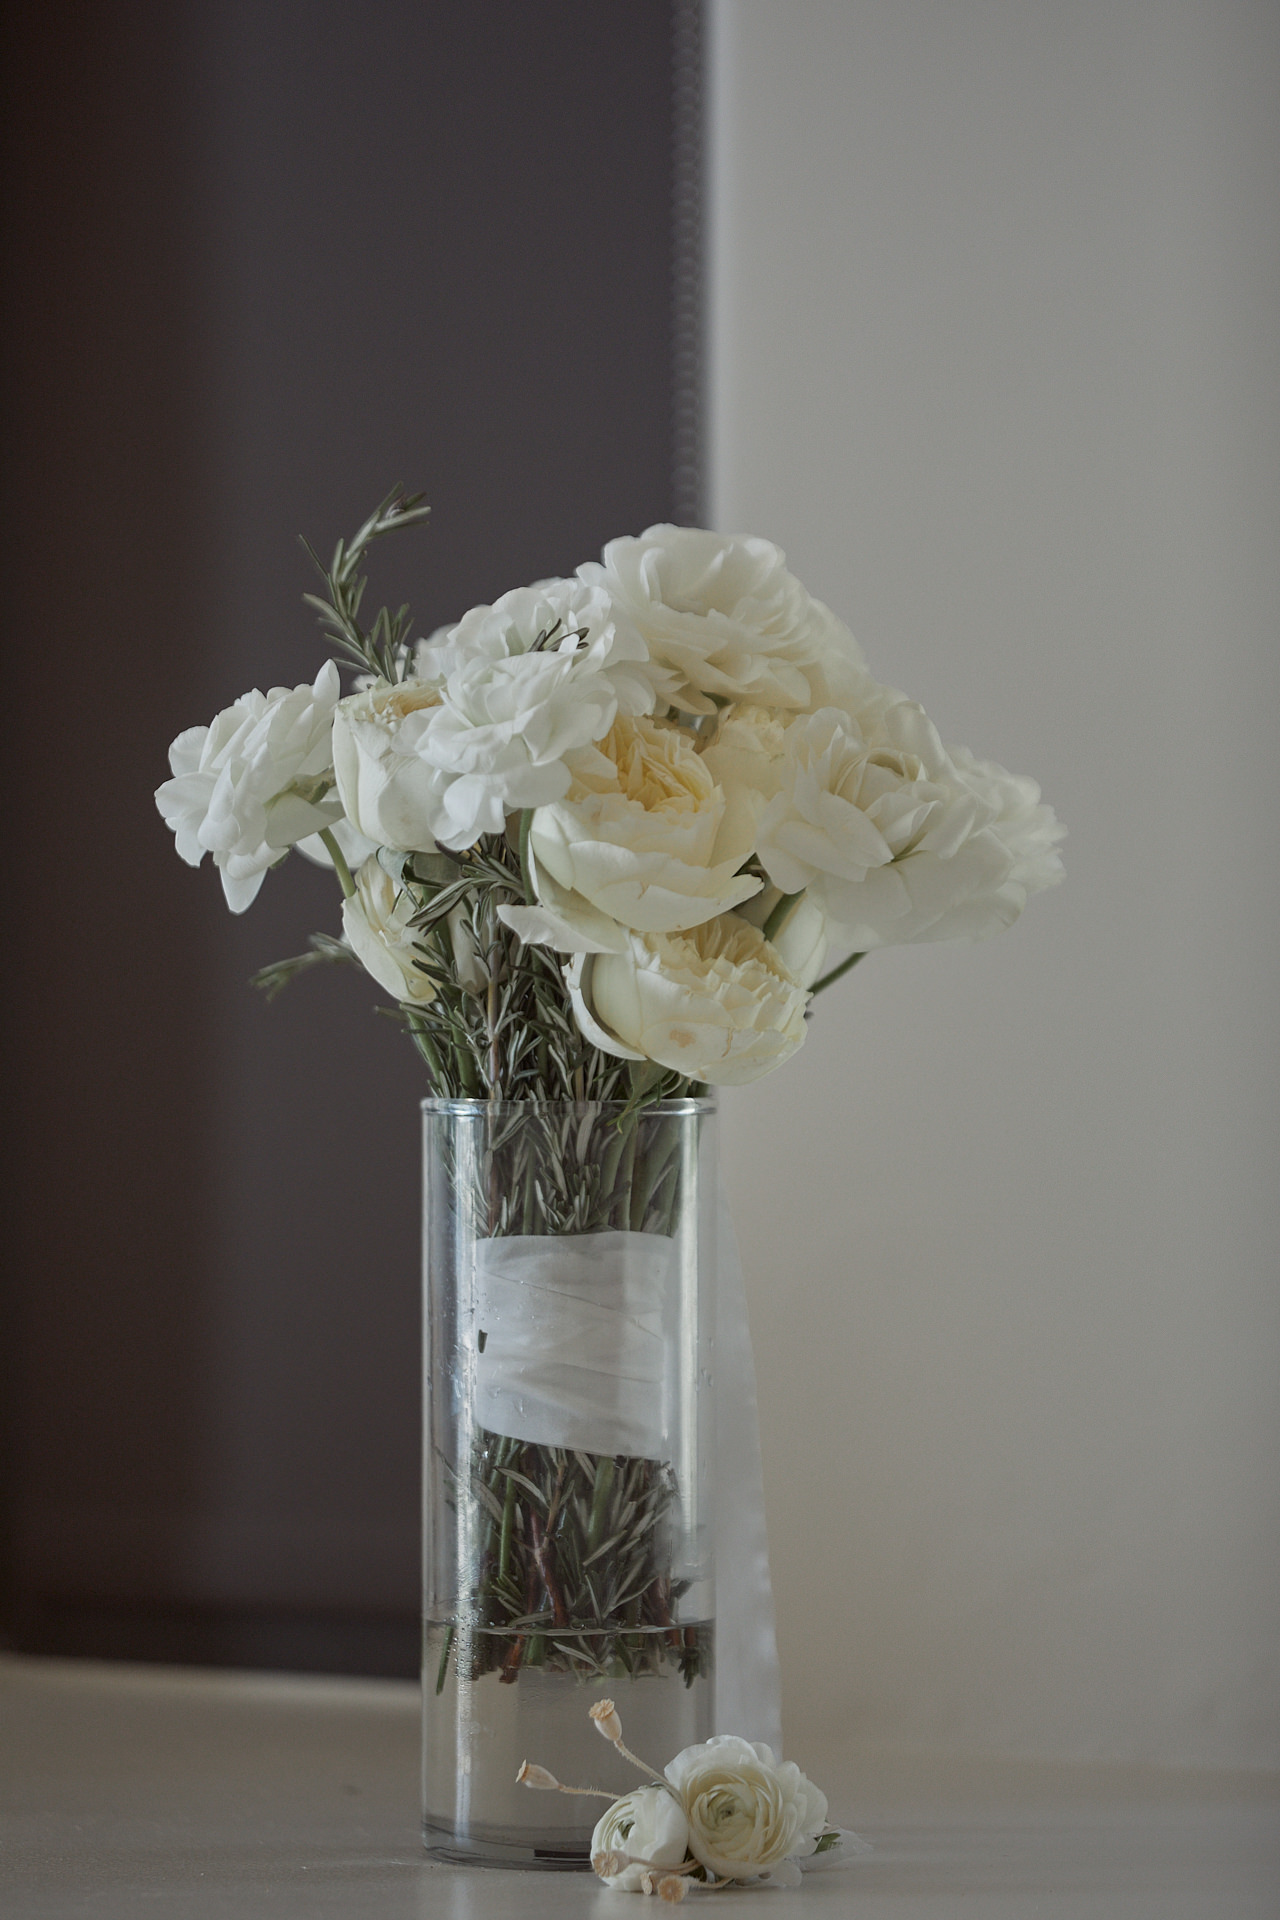 A Vase Filled With White Flowers On Top Of A Table.